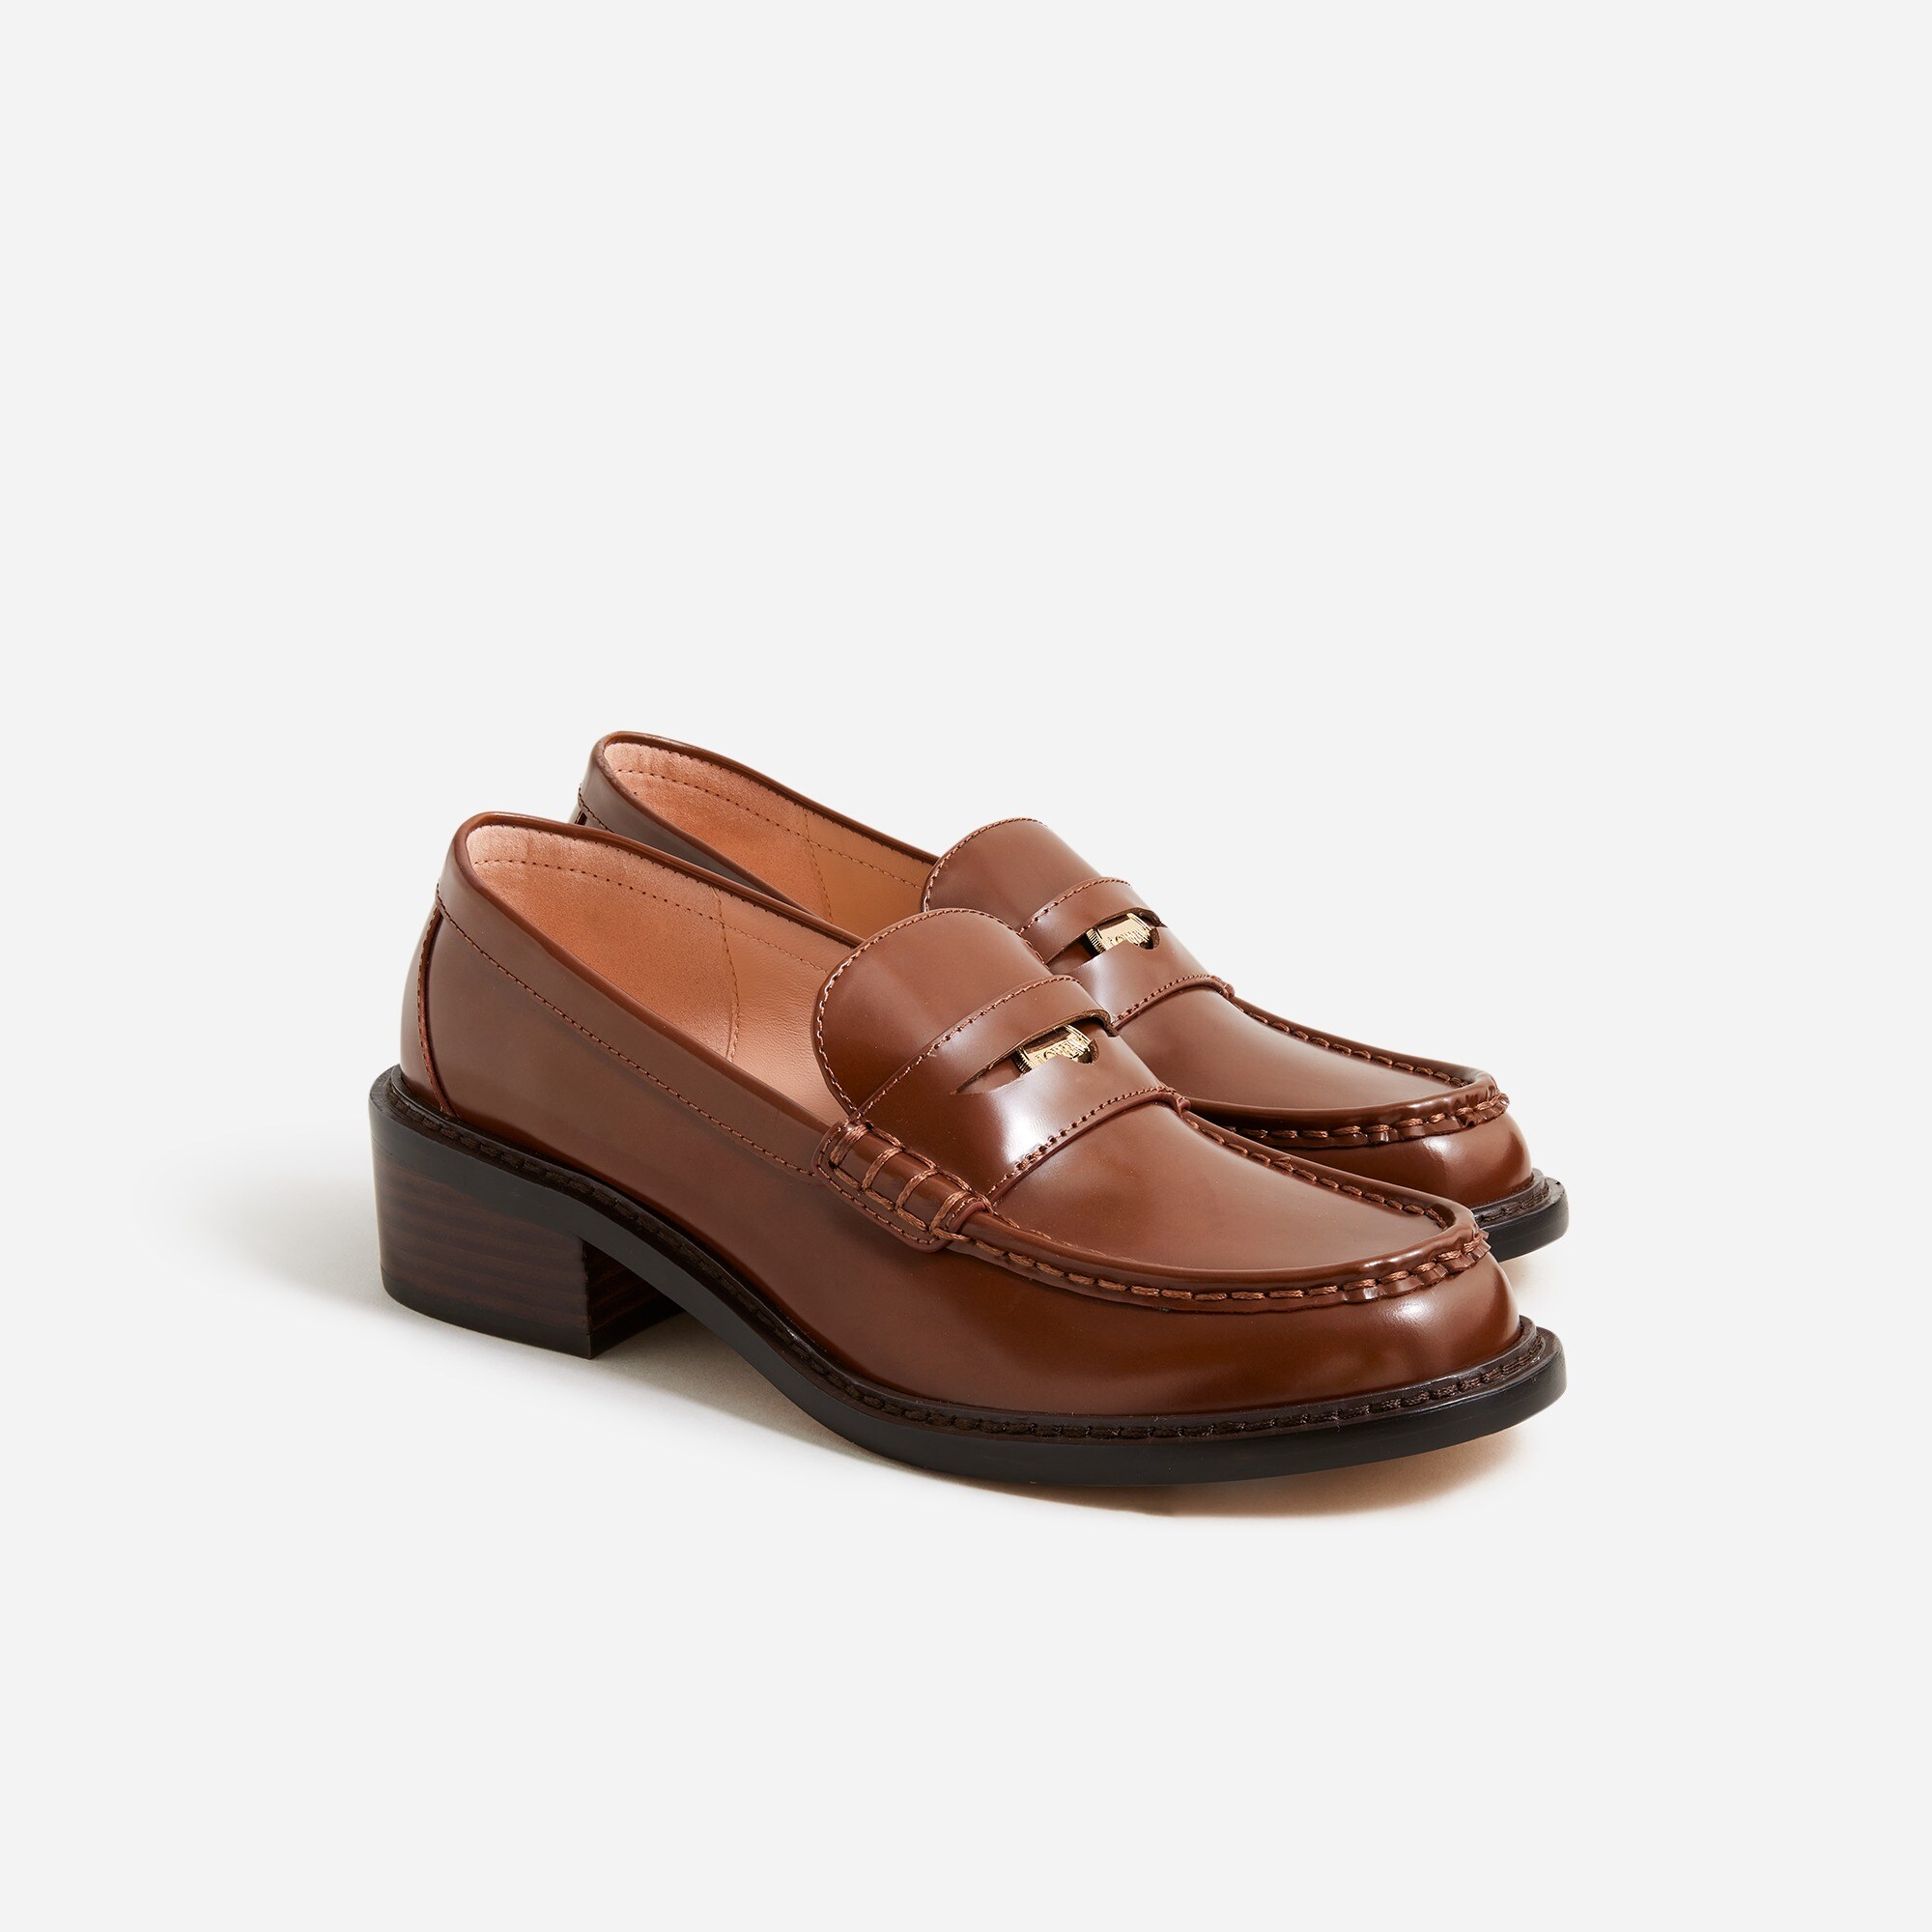  Coin loafers in spazzolato leather